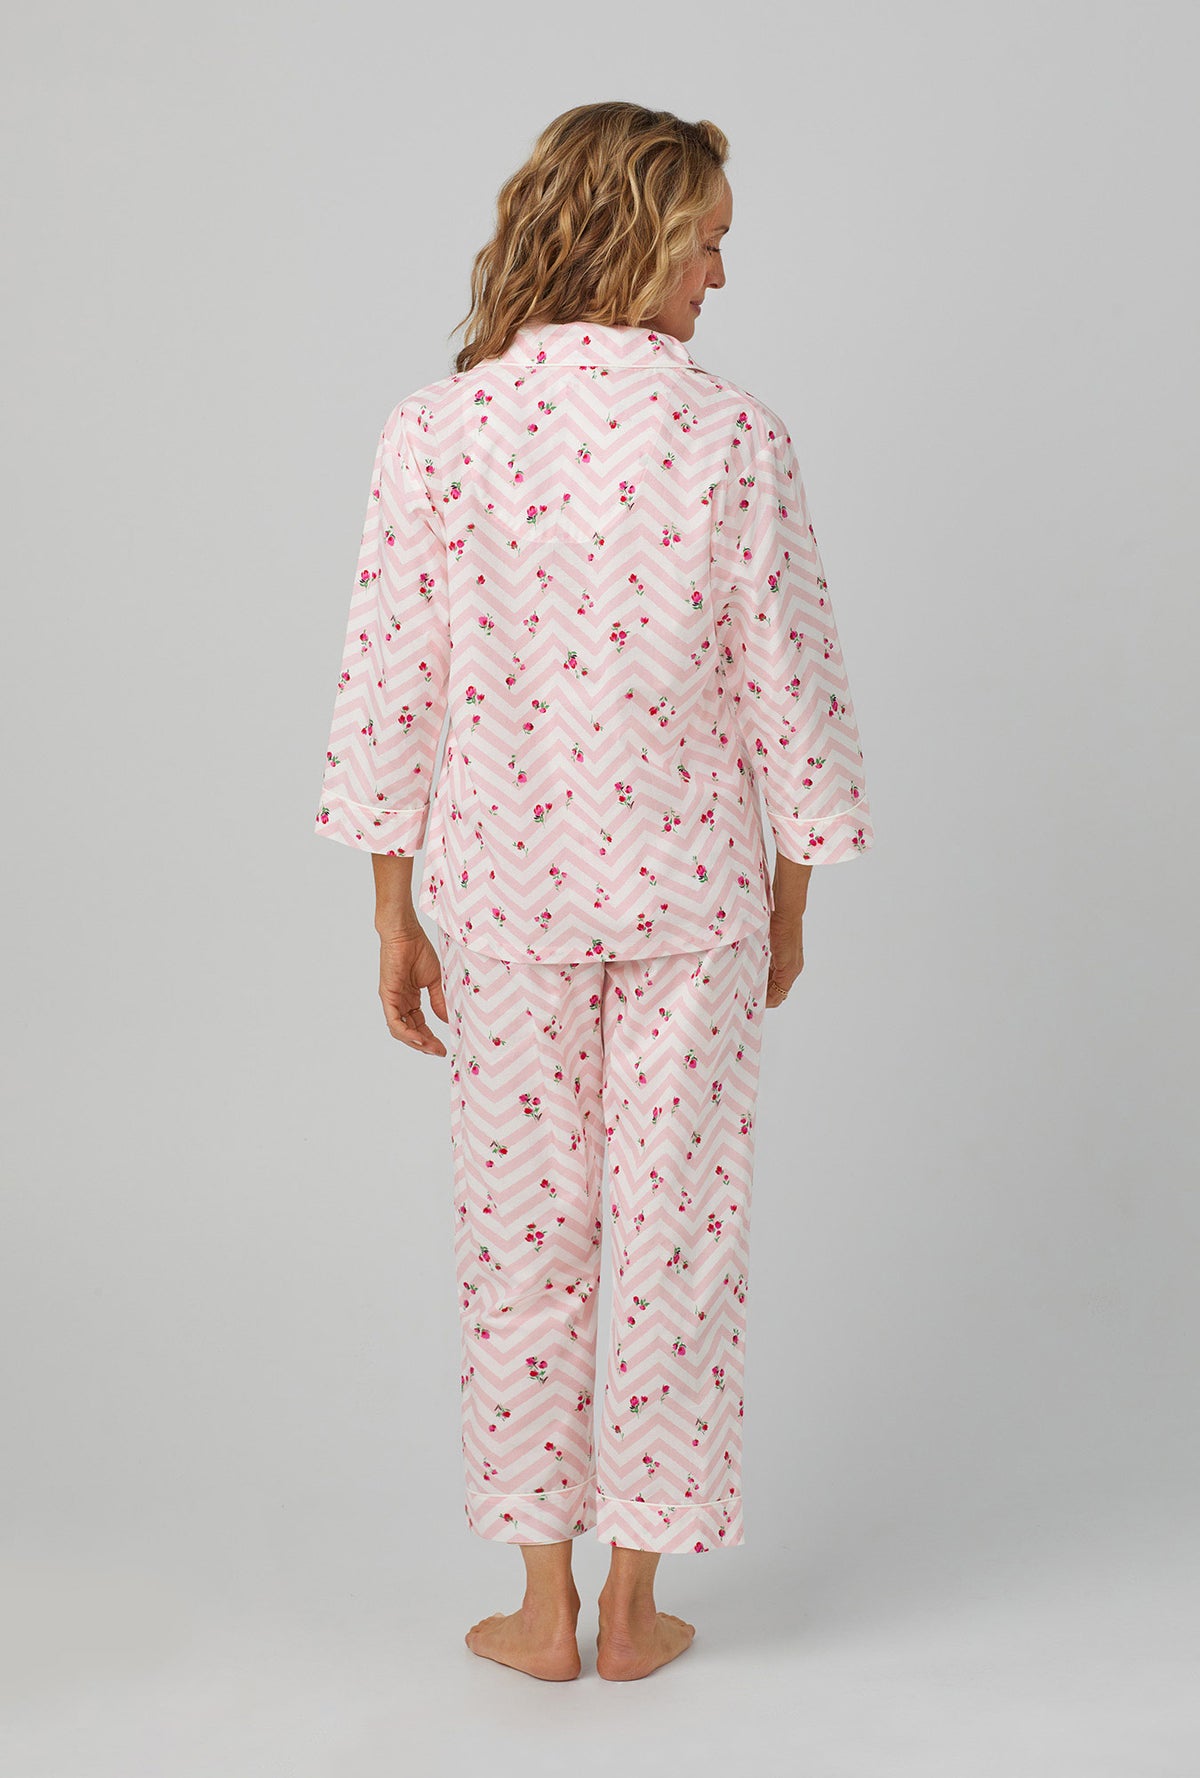 A lady wearing 3/4 sleeve classic cotton poplin cropped pj set with josephine print